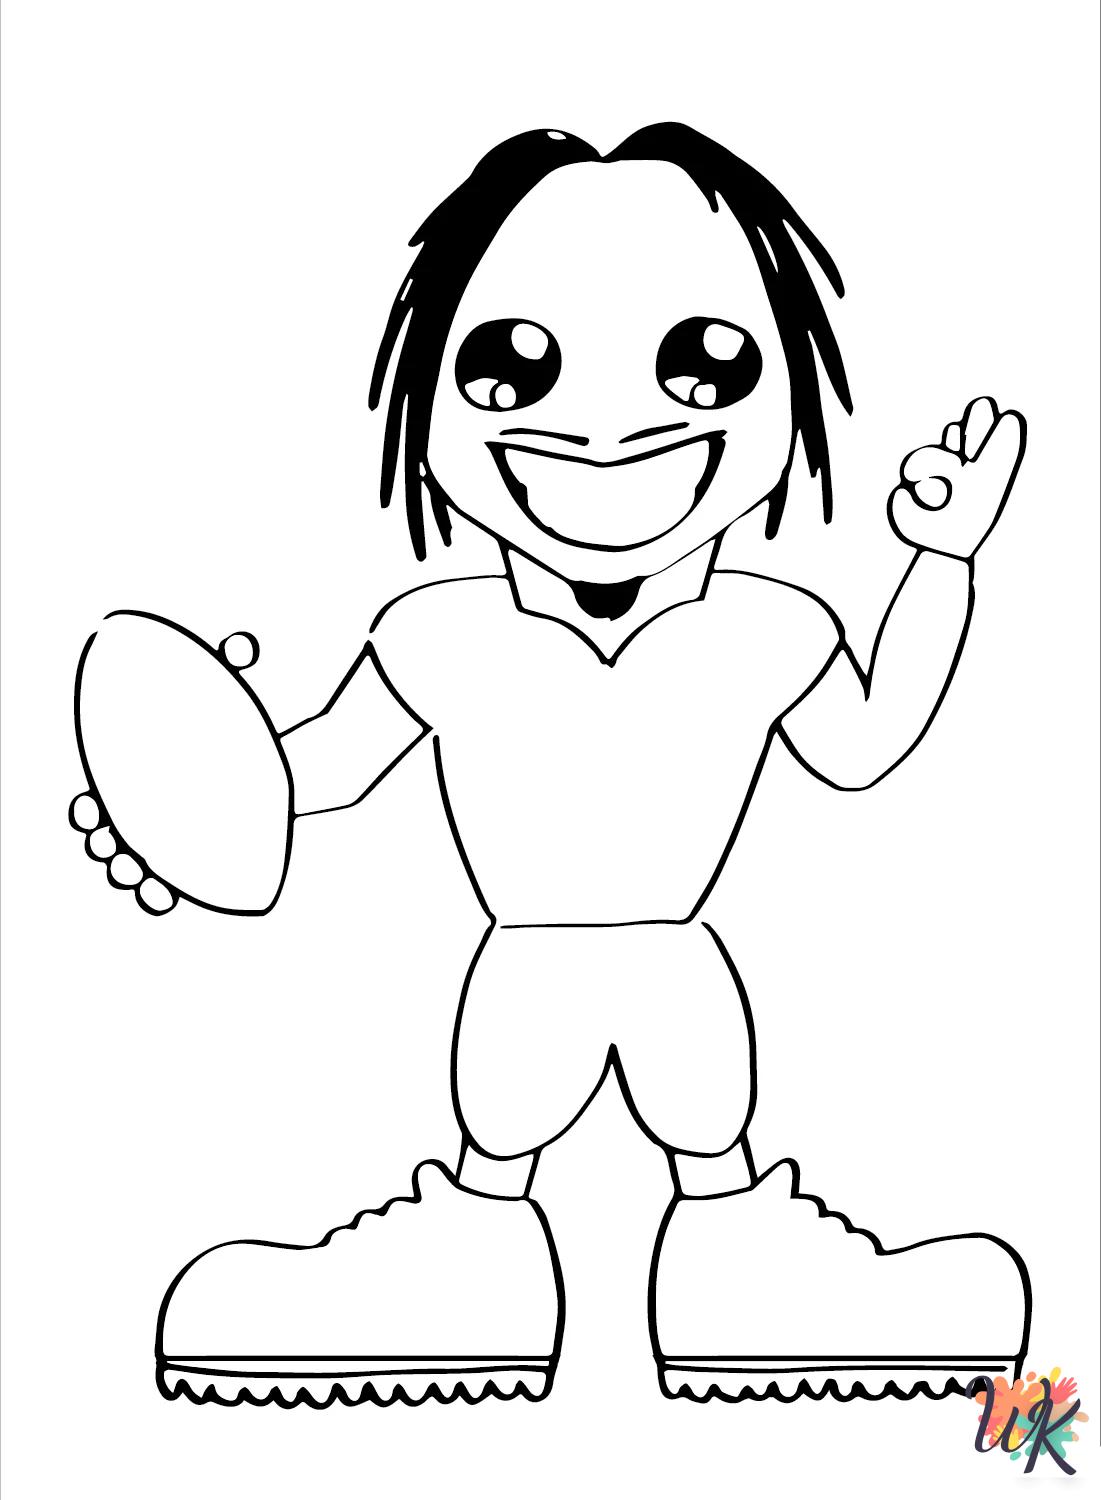 old-fashioned Justin Jefferson coloring pages